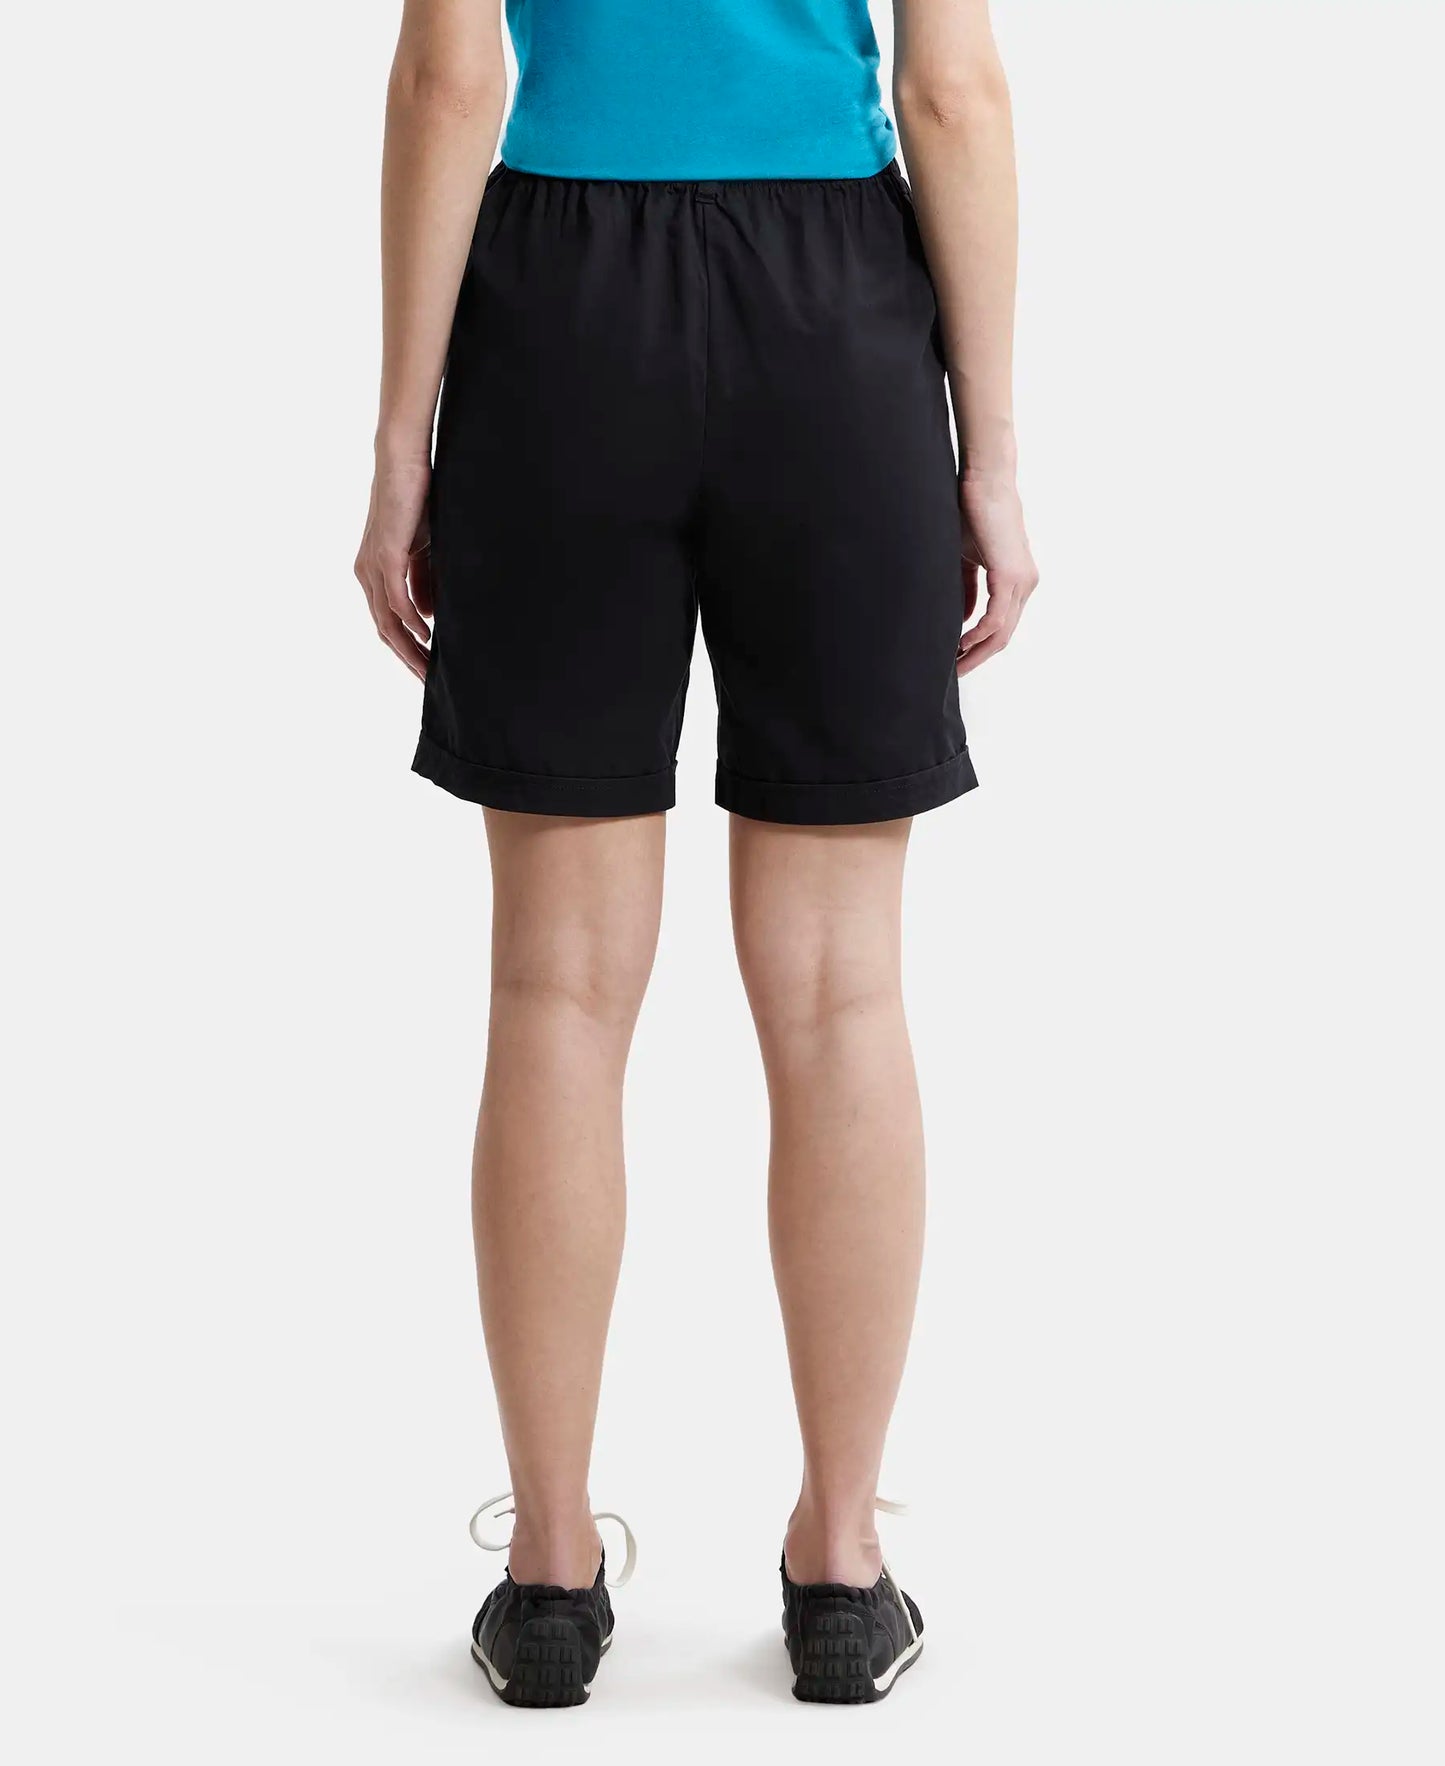 Super Combed Cotton Woven Twill Fabric Relaxed Fit Shorts with Convenient Side Pockets - Black-3